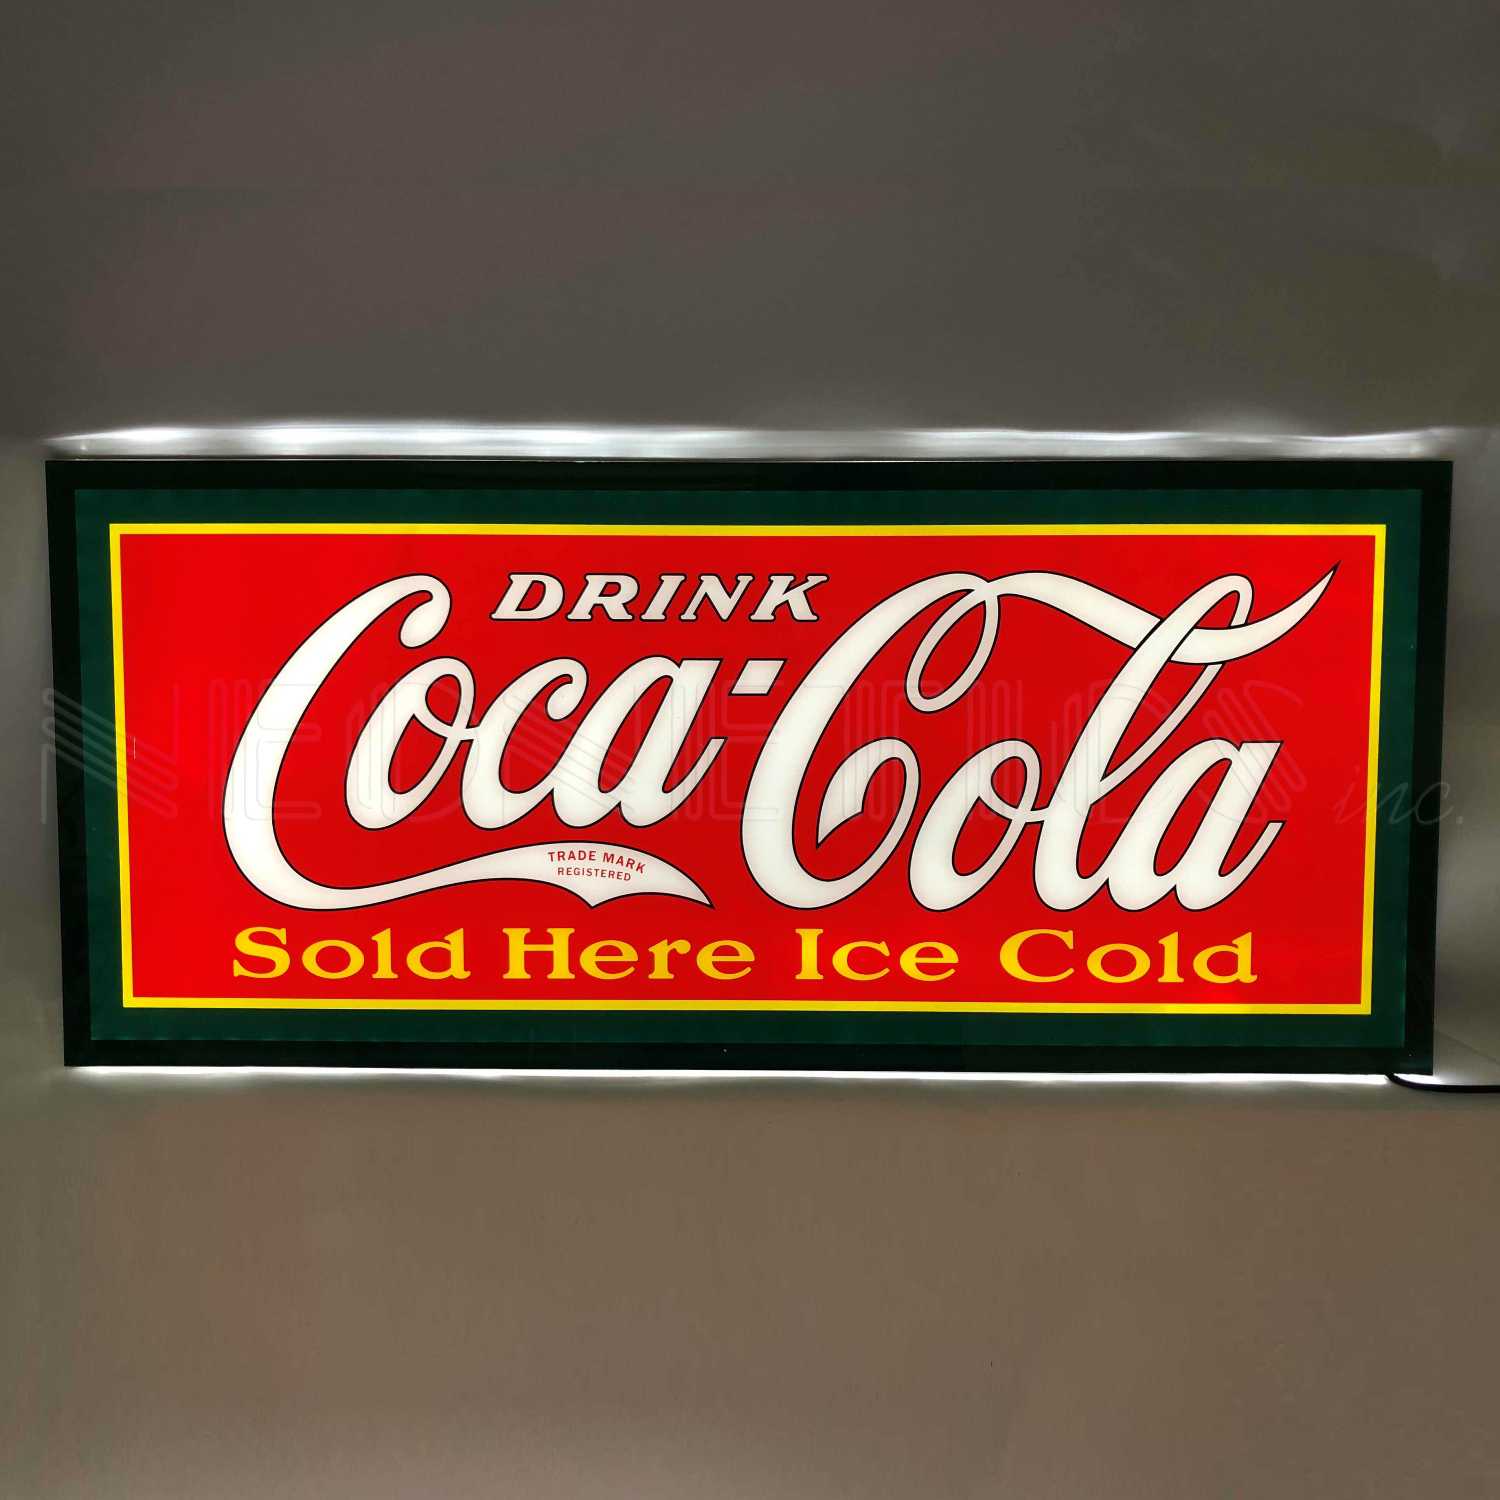 DRINK COCA-COLA SOLD HERE ICE COLD SLIM LED SIGN